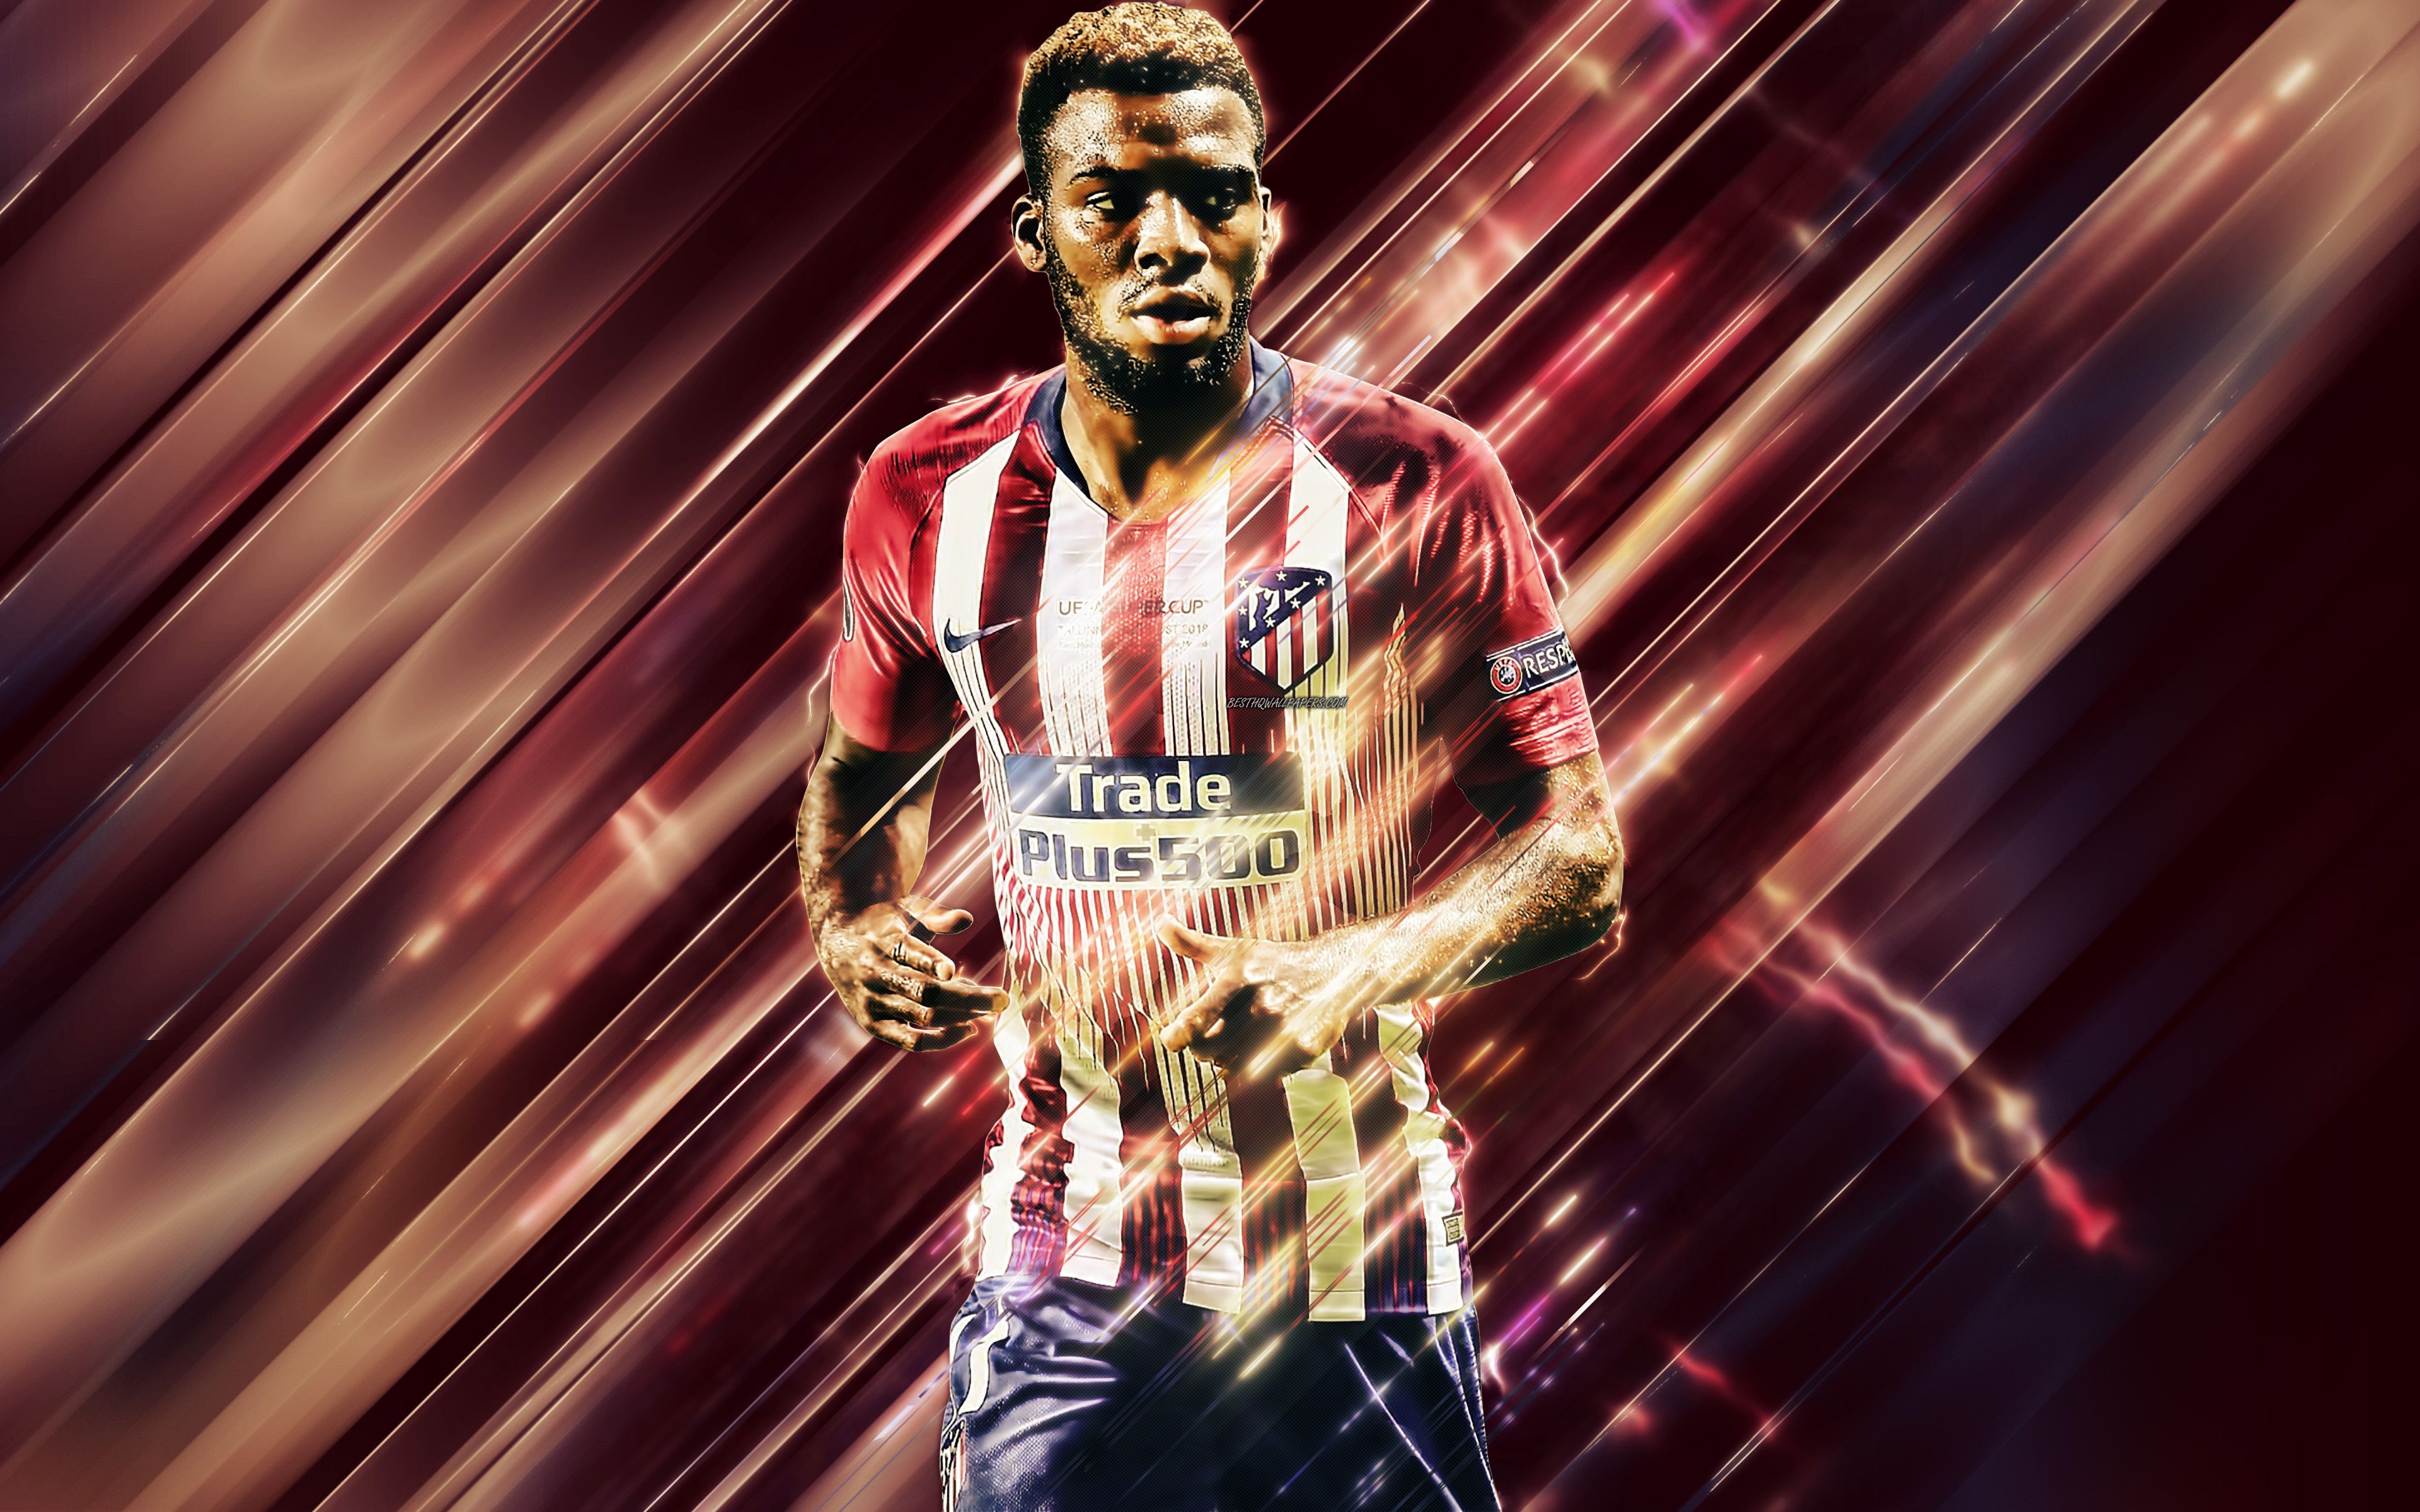 Download wallpaper Thomas Lemar, 4k, creative art, blades style, Atletico Madrid, French footballer, La Liga, Spain, red creative background, football for desktop with resolution 3840x2400. High Quality HD picture wallpaper